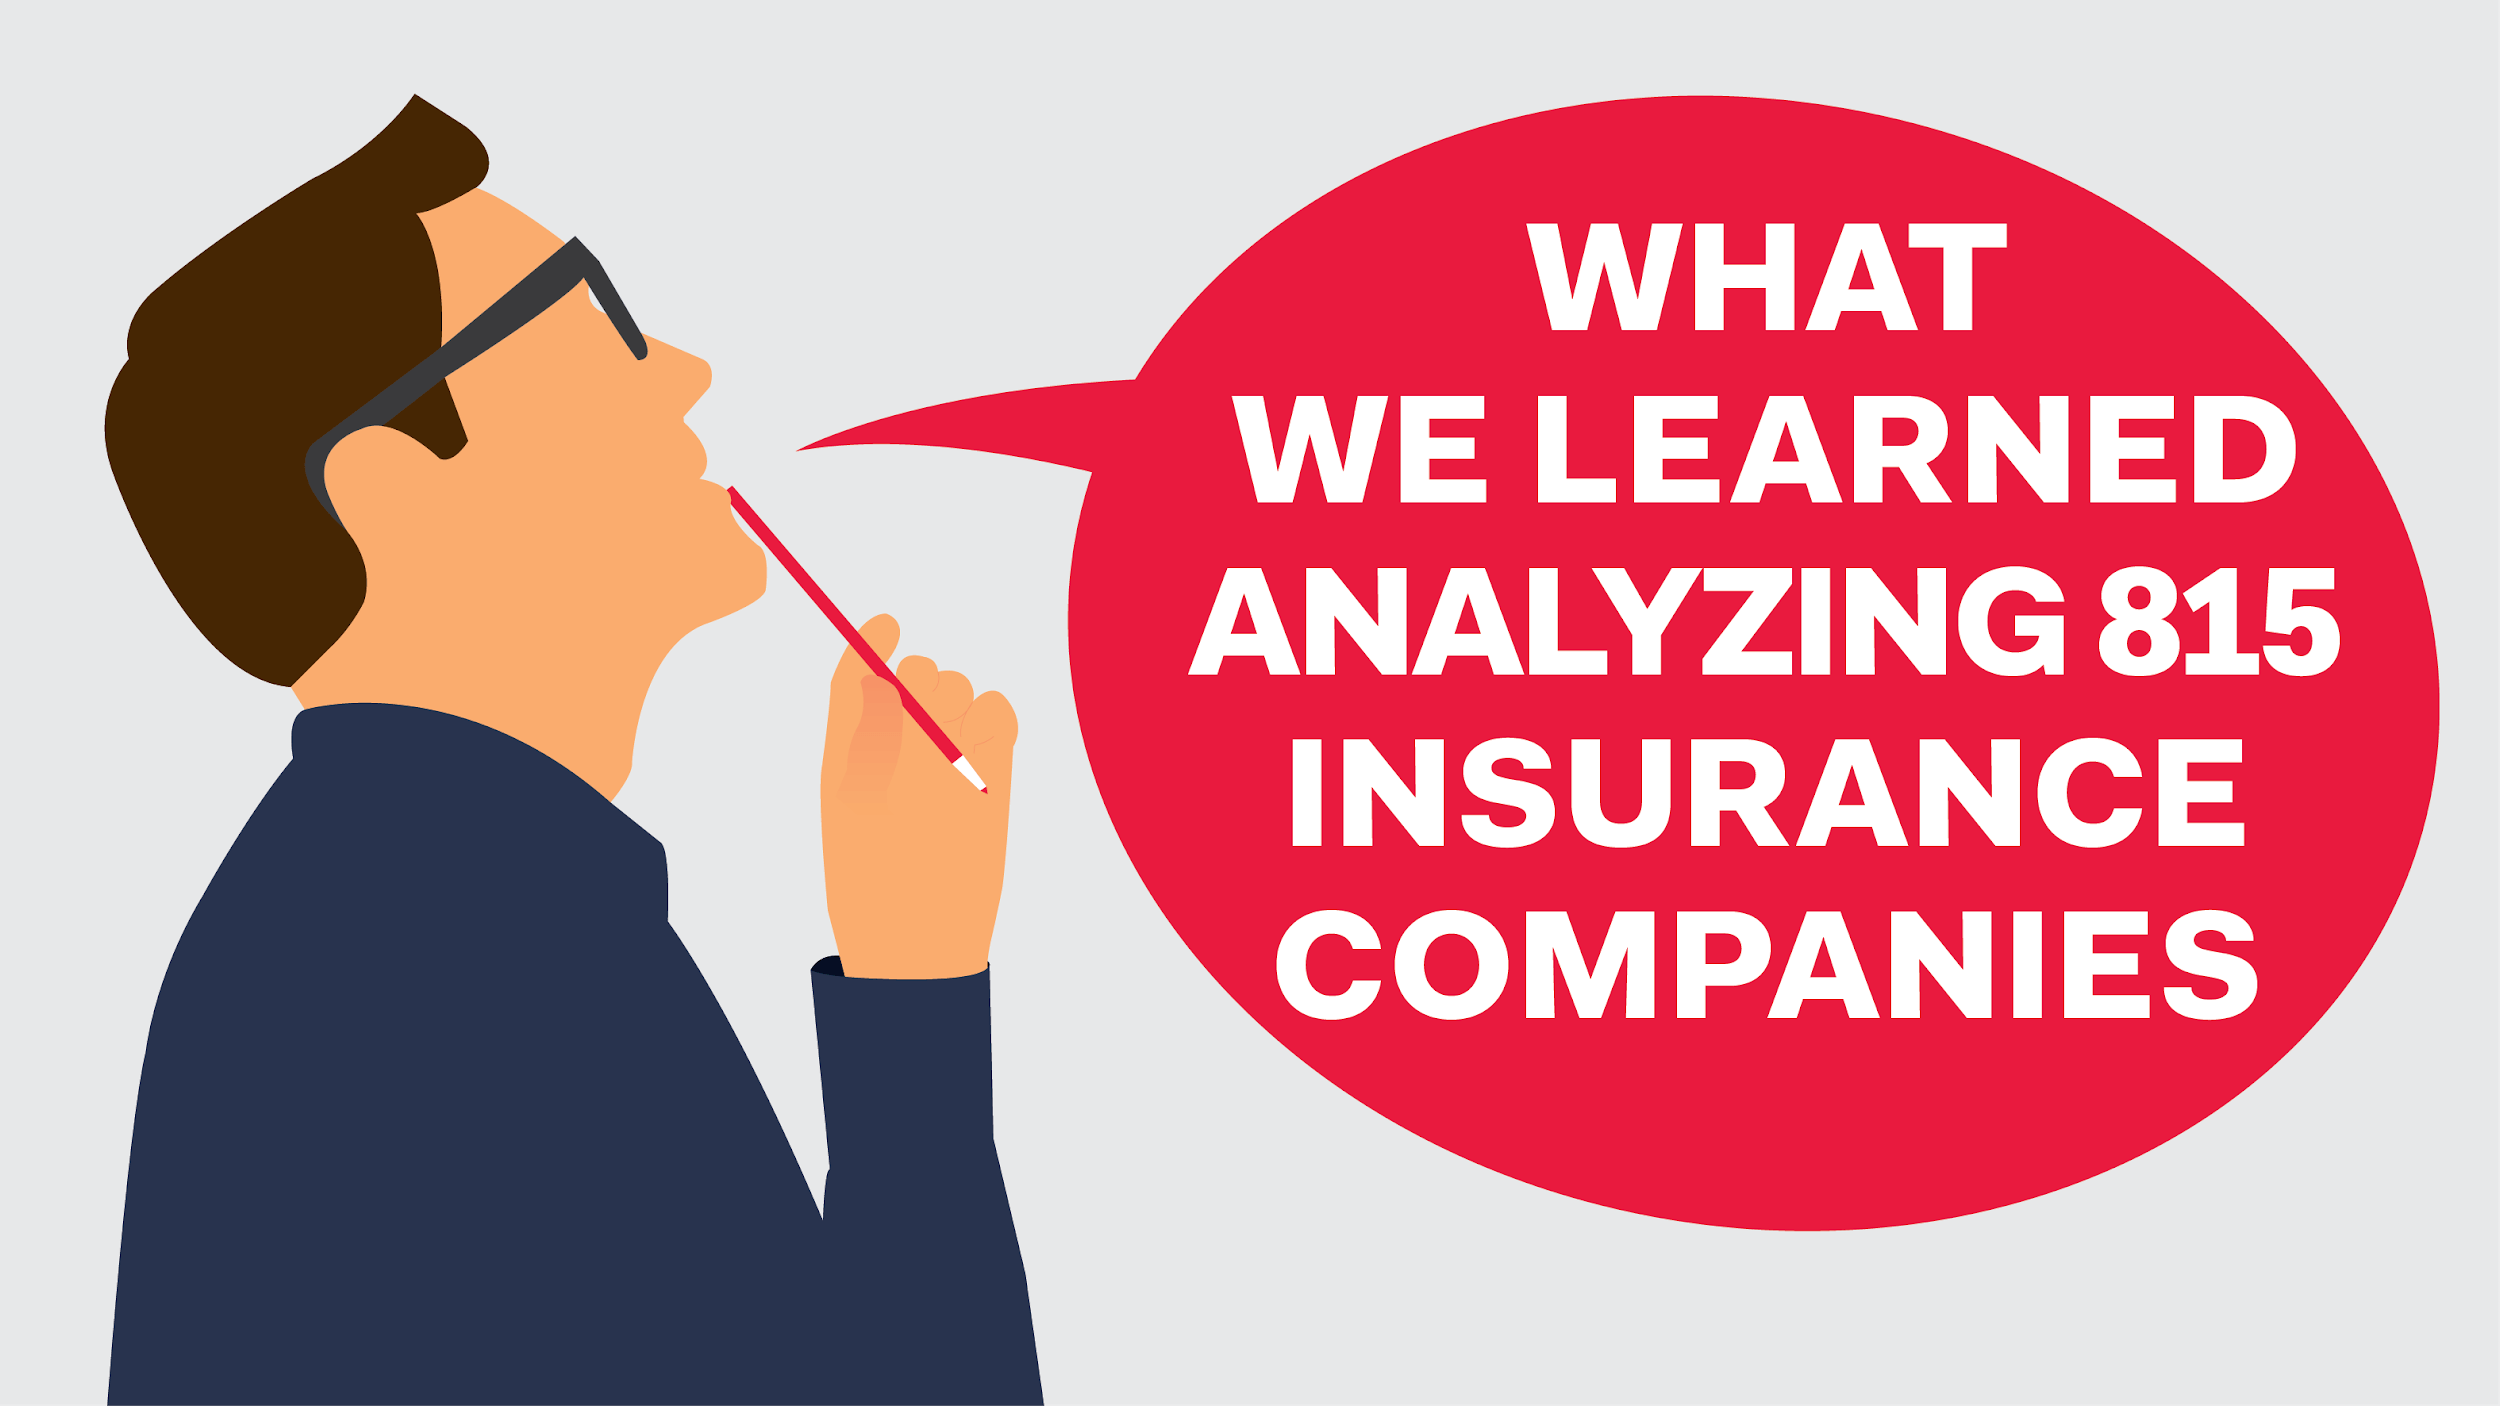 What We Learned Analyzing 815 Insurance Companies